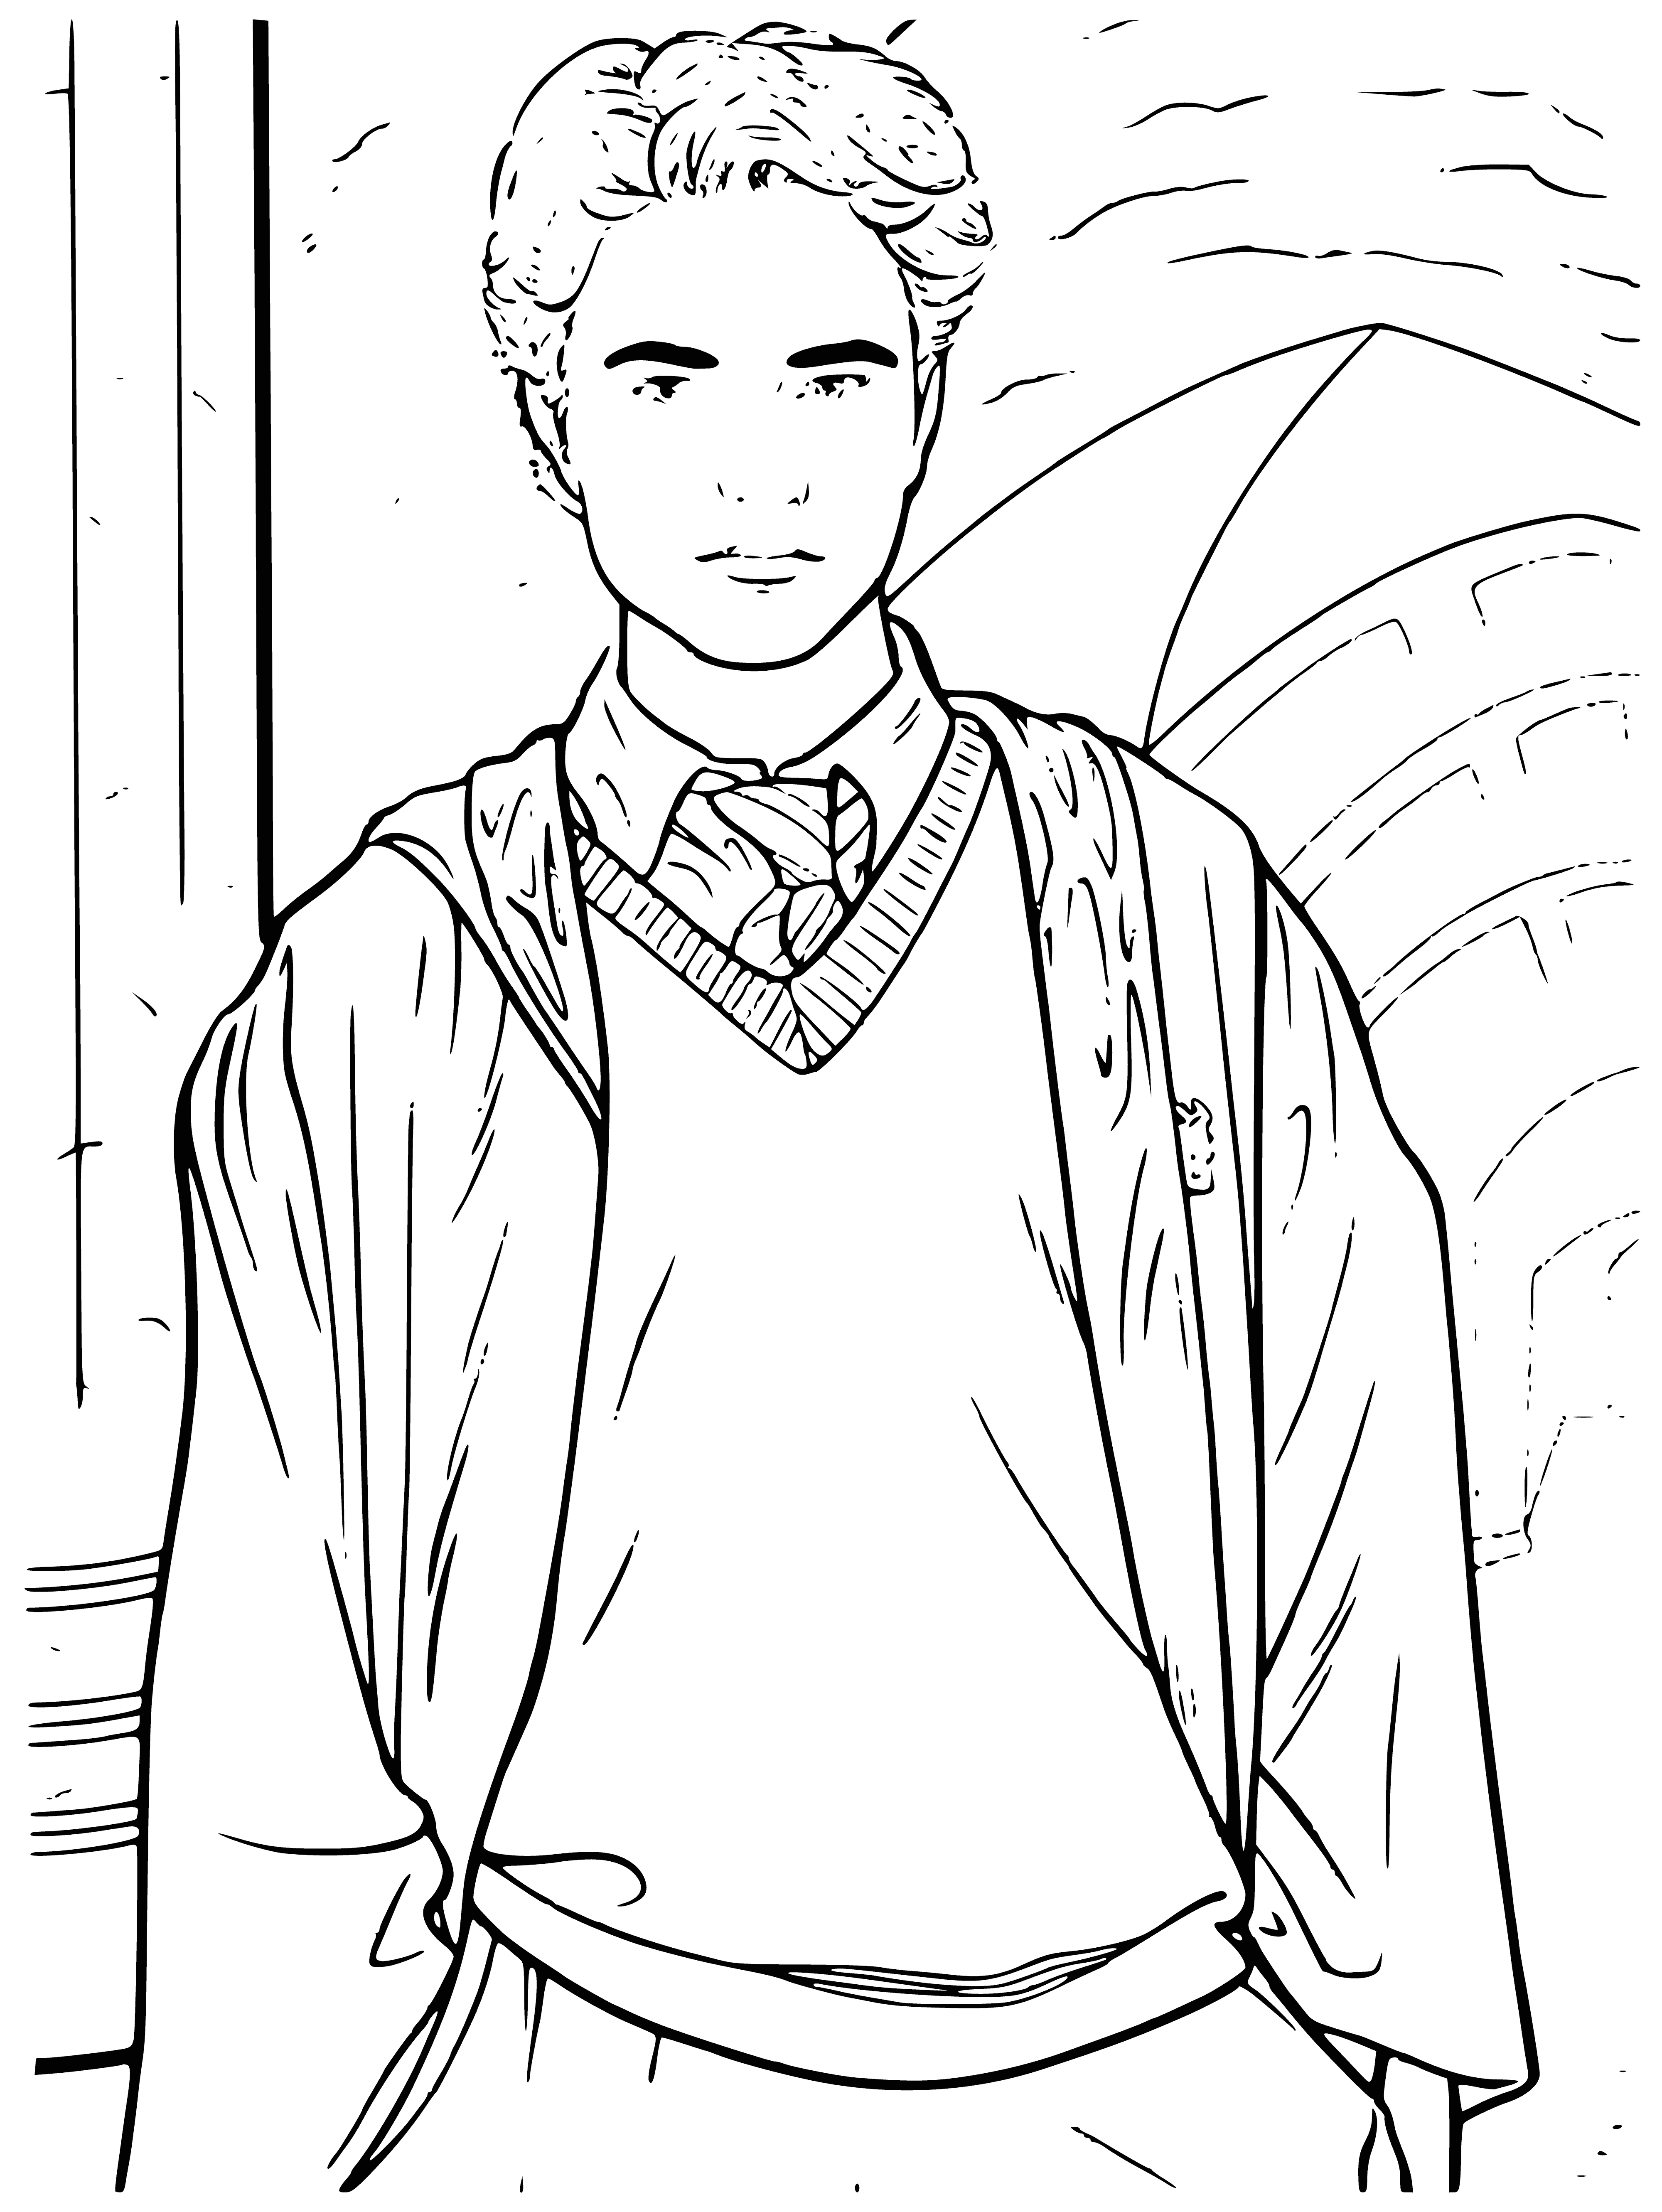 coloring page: A wizard with light brown hair, blue eyes, black cloak, and wand, appears serious and determined.